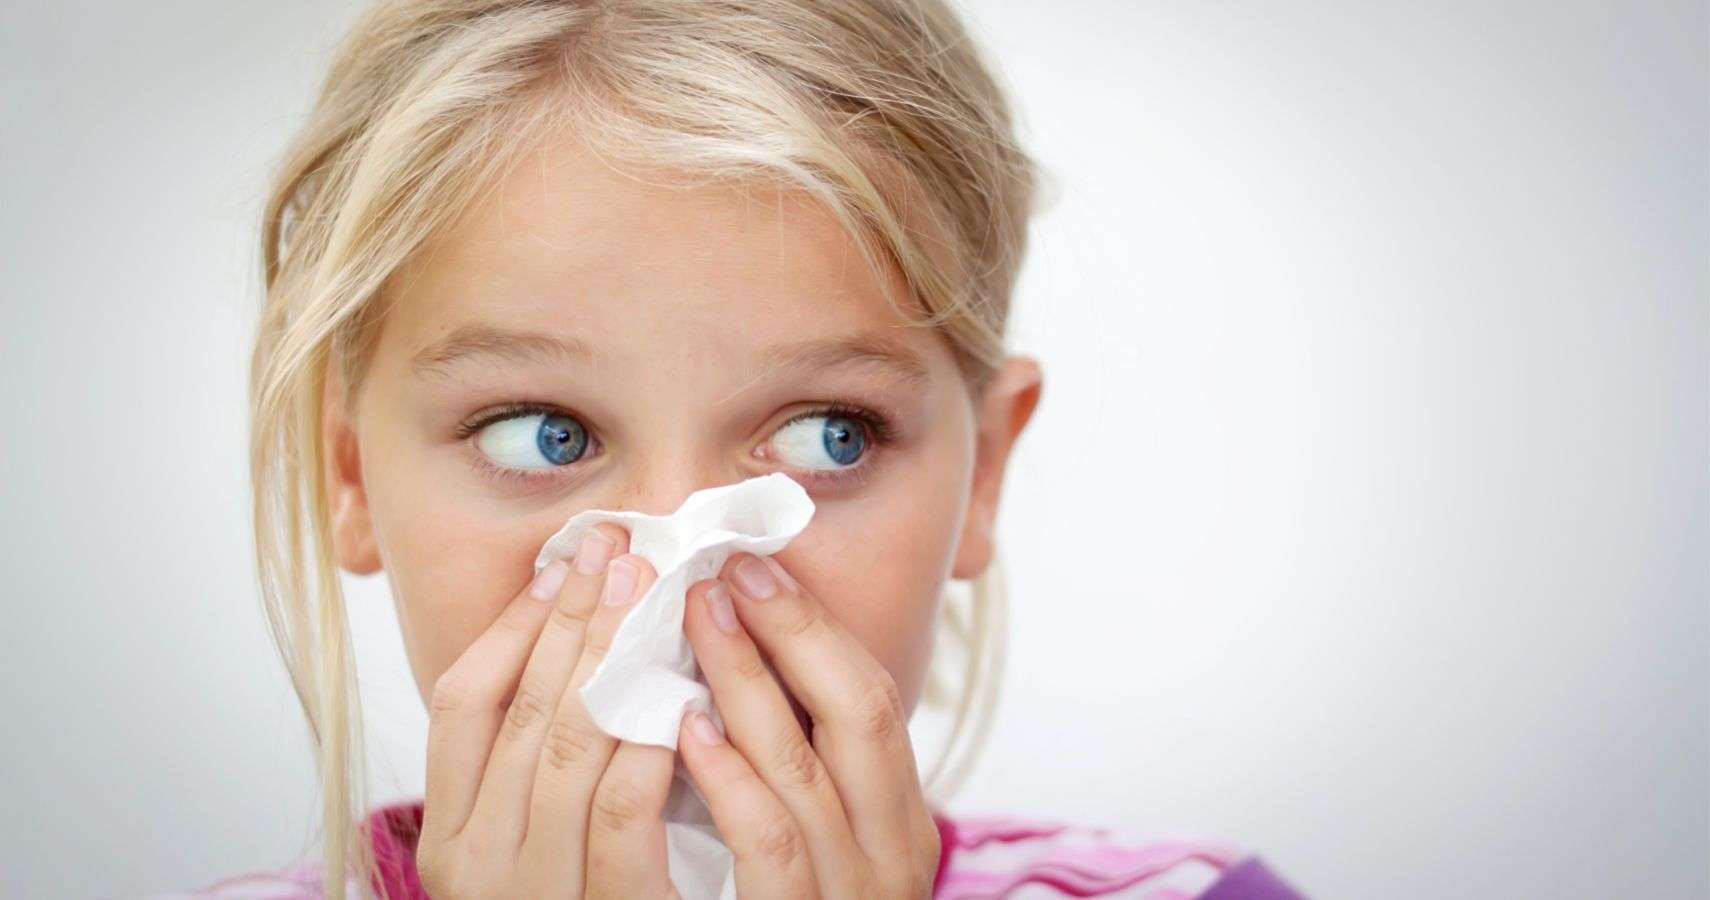 How To Tell The Difference If Your Child Has A Cold Or ...